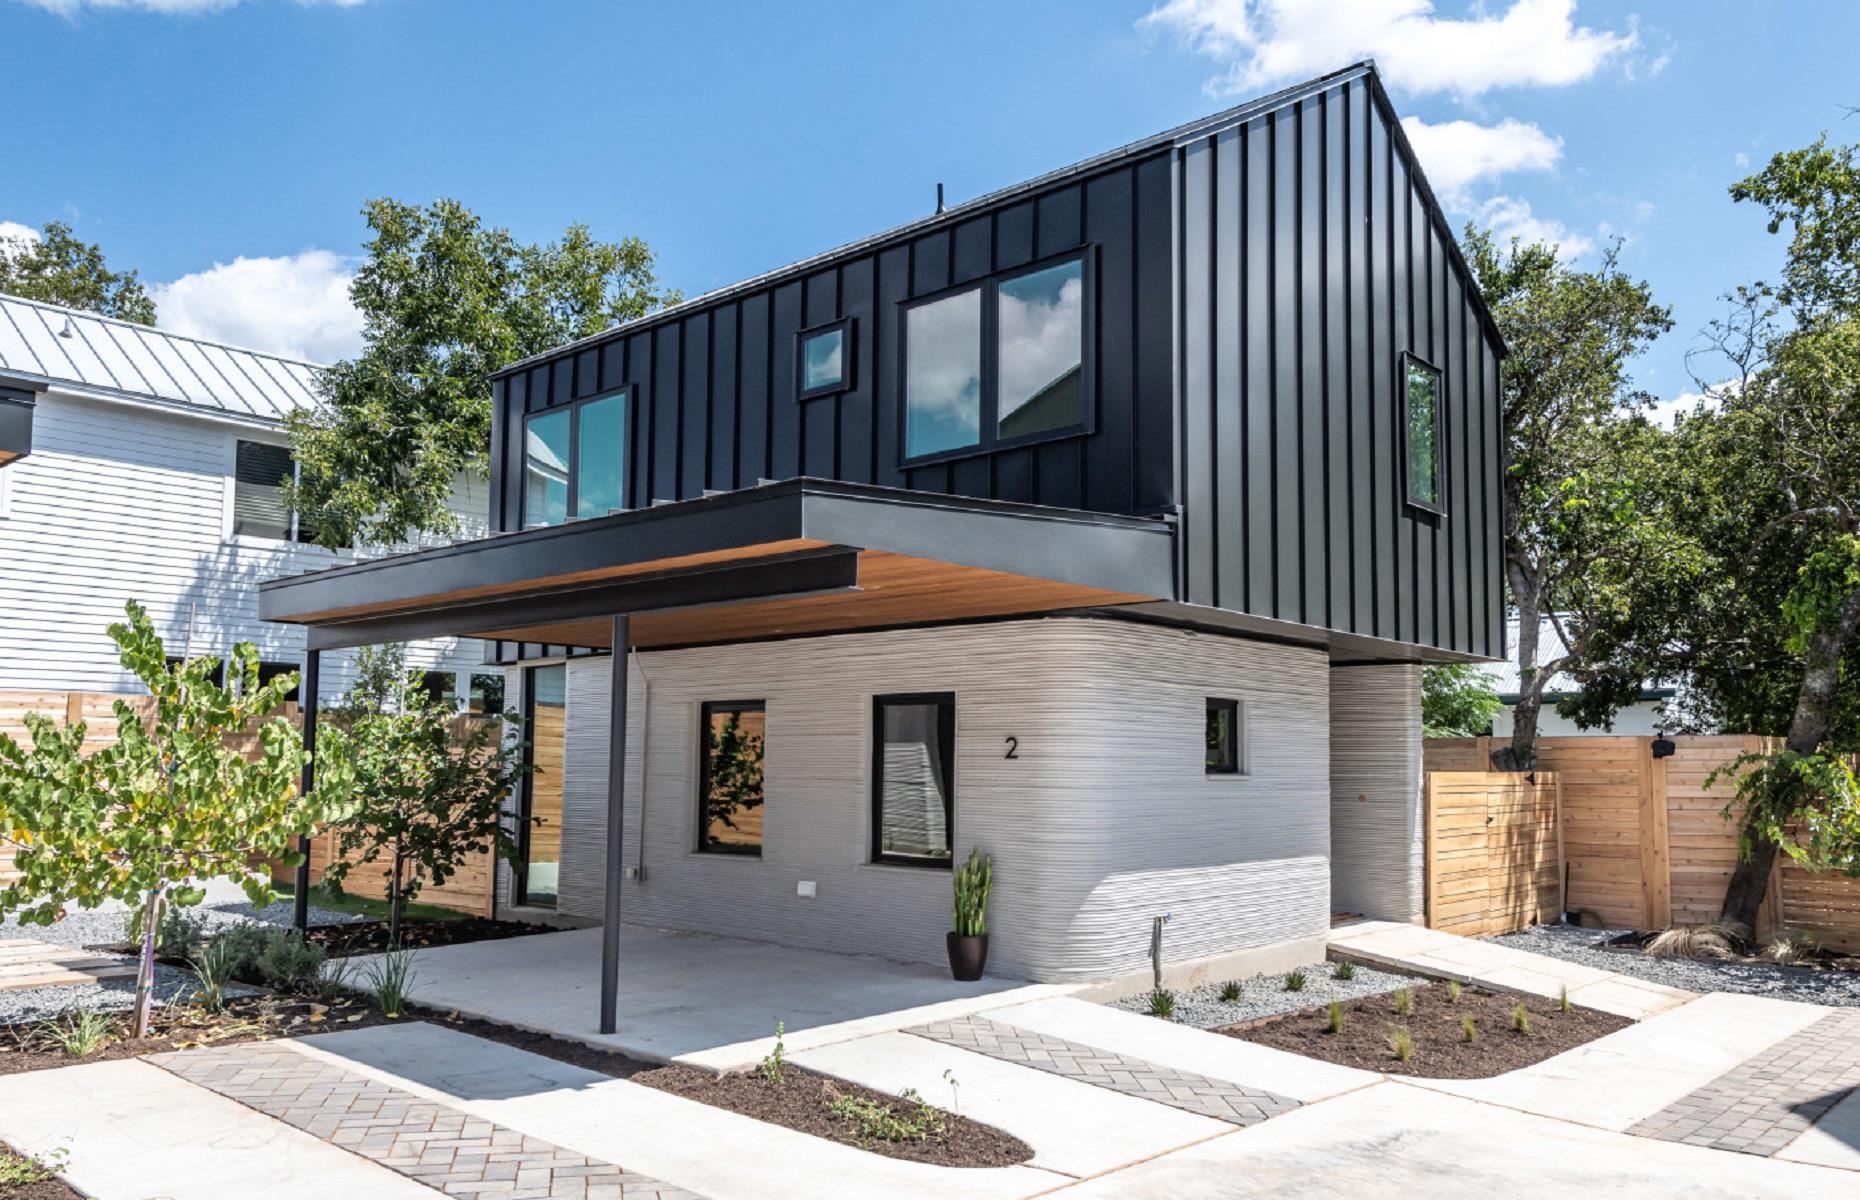 <p>The neighborhood currently consists of four unique homes, sustainably built using ICON’s 3D-printing construction technology. Each house has a flexible floor plan with a private garden, open-plan interior, bespoke interior design, large windows and a high-performance heating, ventilation and air-conditioning system.</p>